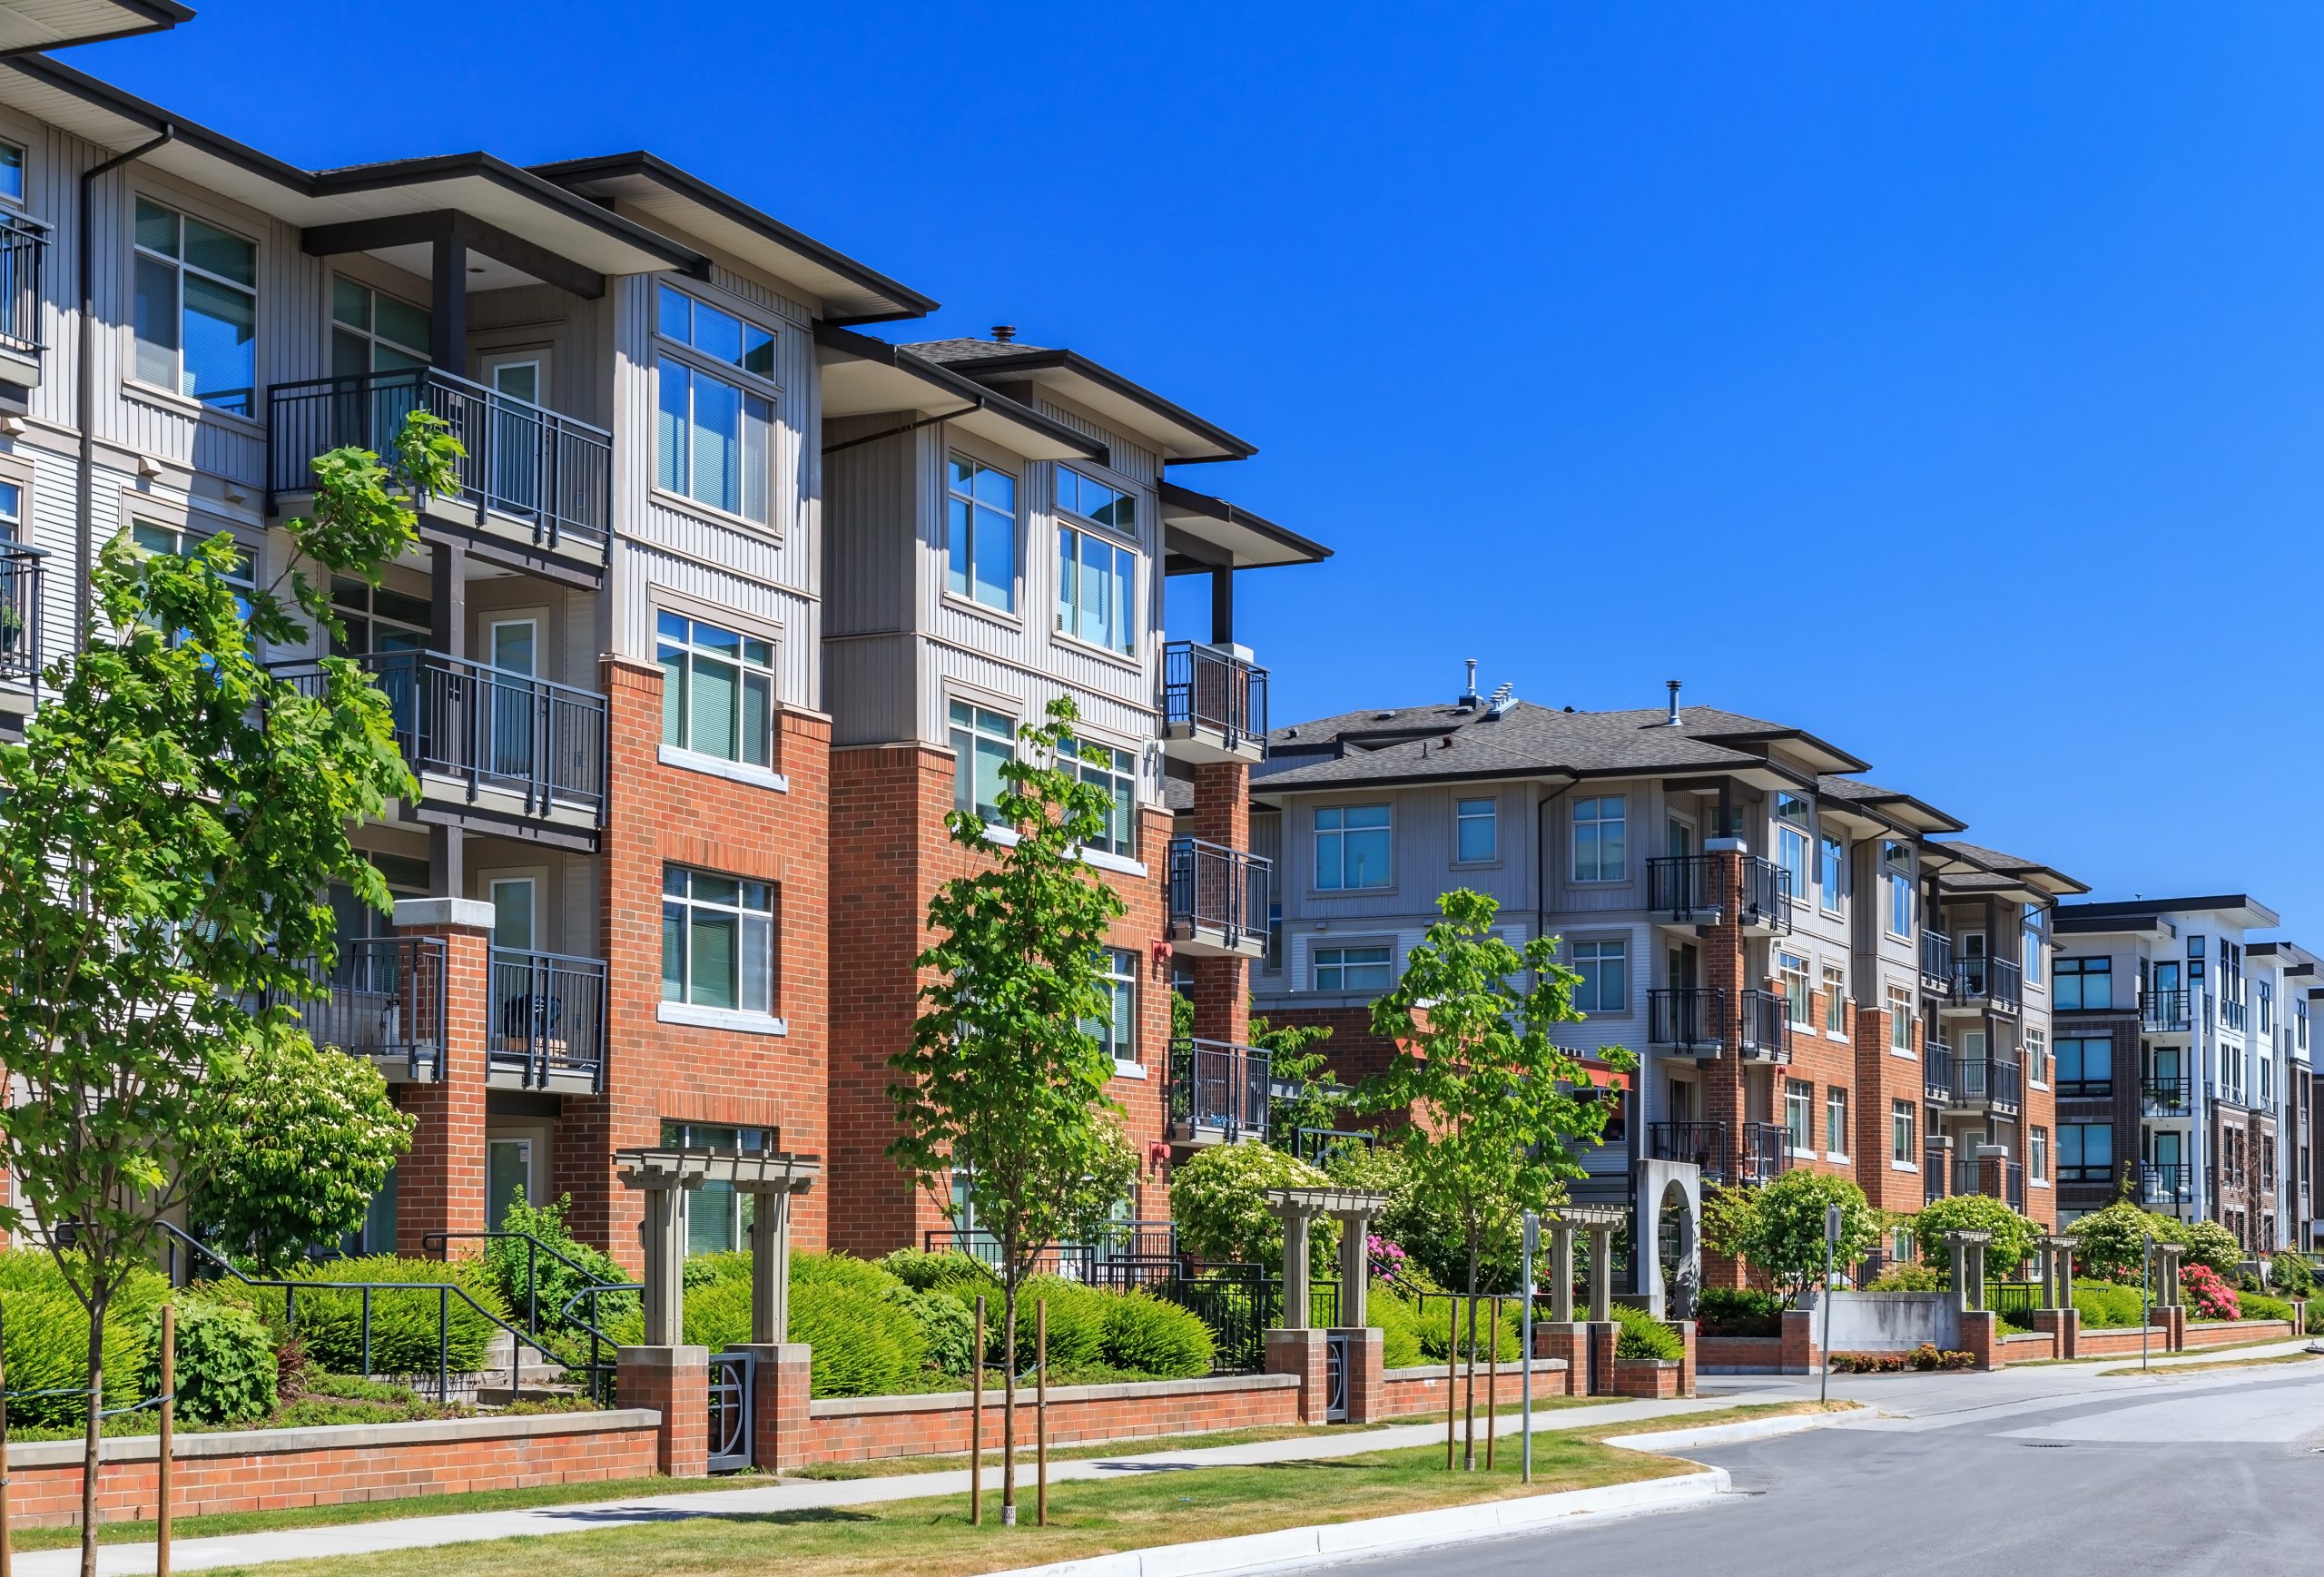 Can an individual condominium unit owner sue for undisclosed defects in the construction of the condominium building as a whole? Washington DC Legal Article Featured Image by Antonoplos & Associates